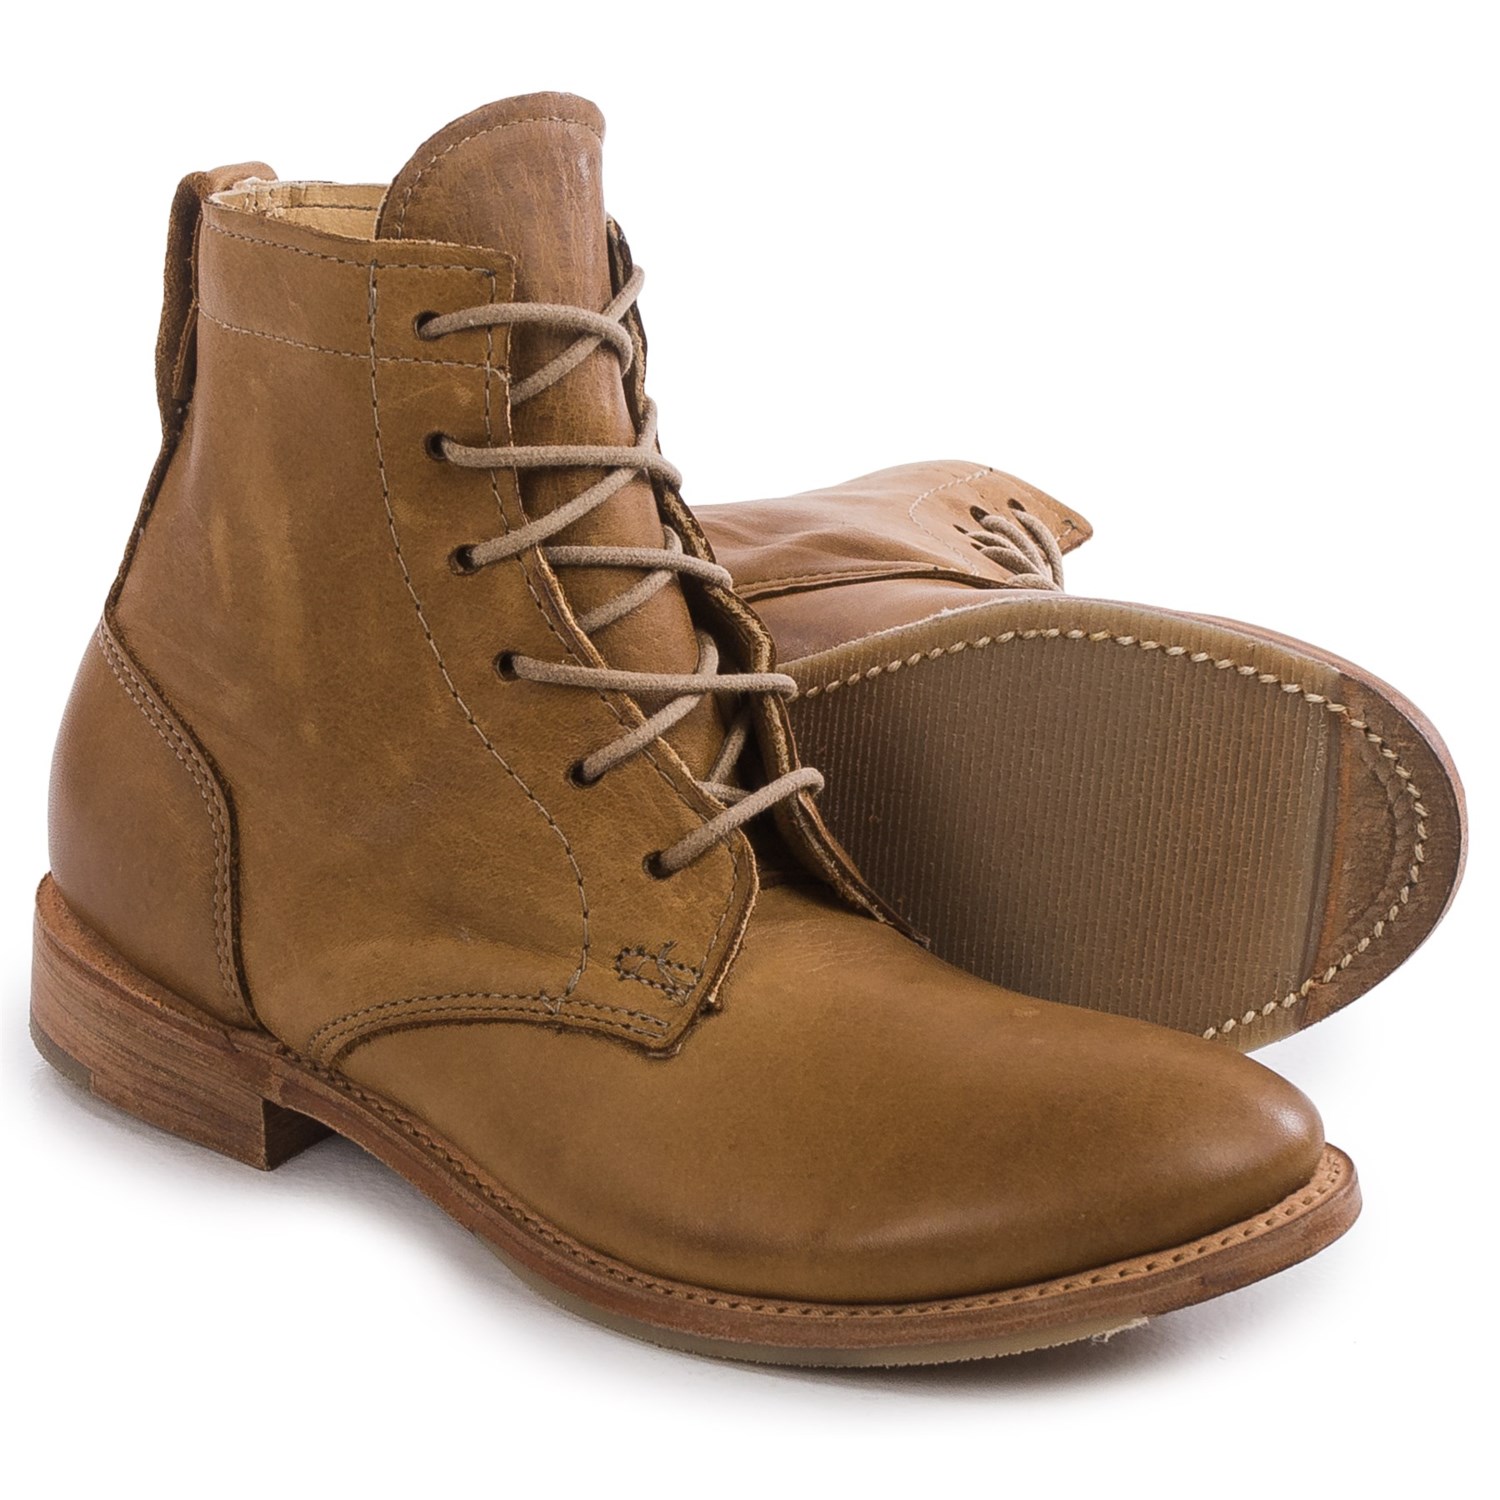 Vintage Shoe Company Lilly Boots (For Women) - Save 79%